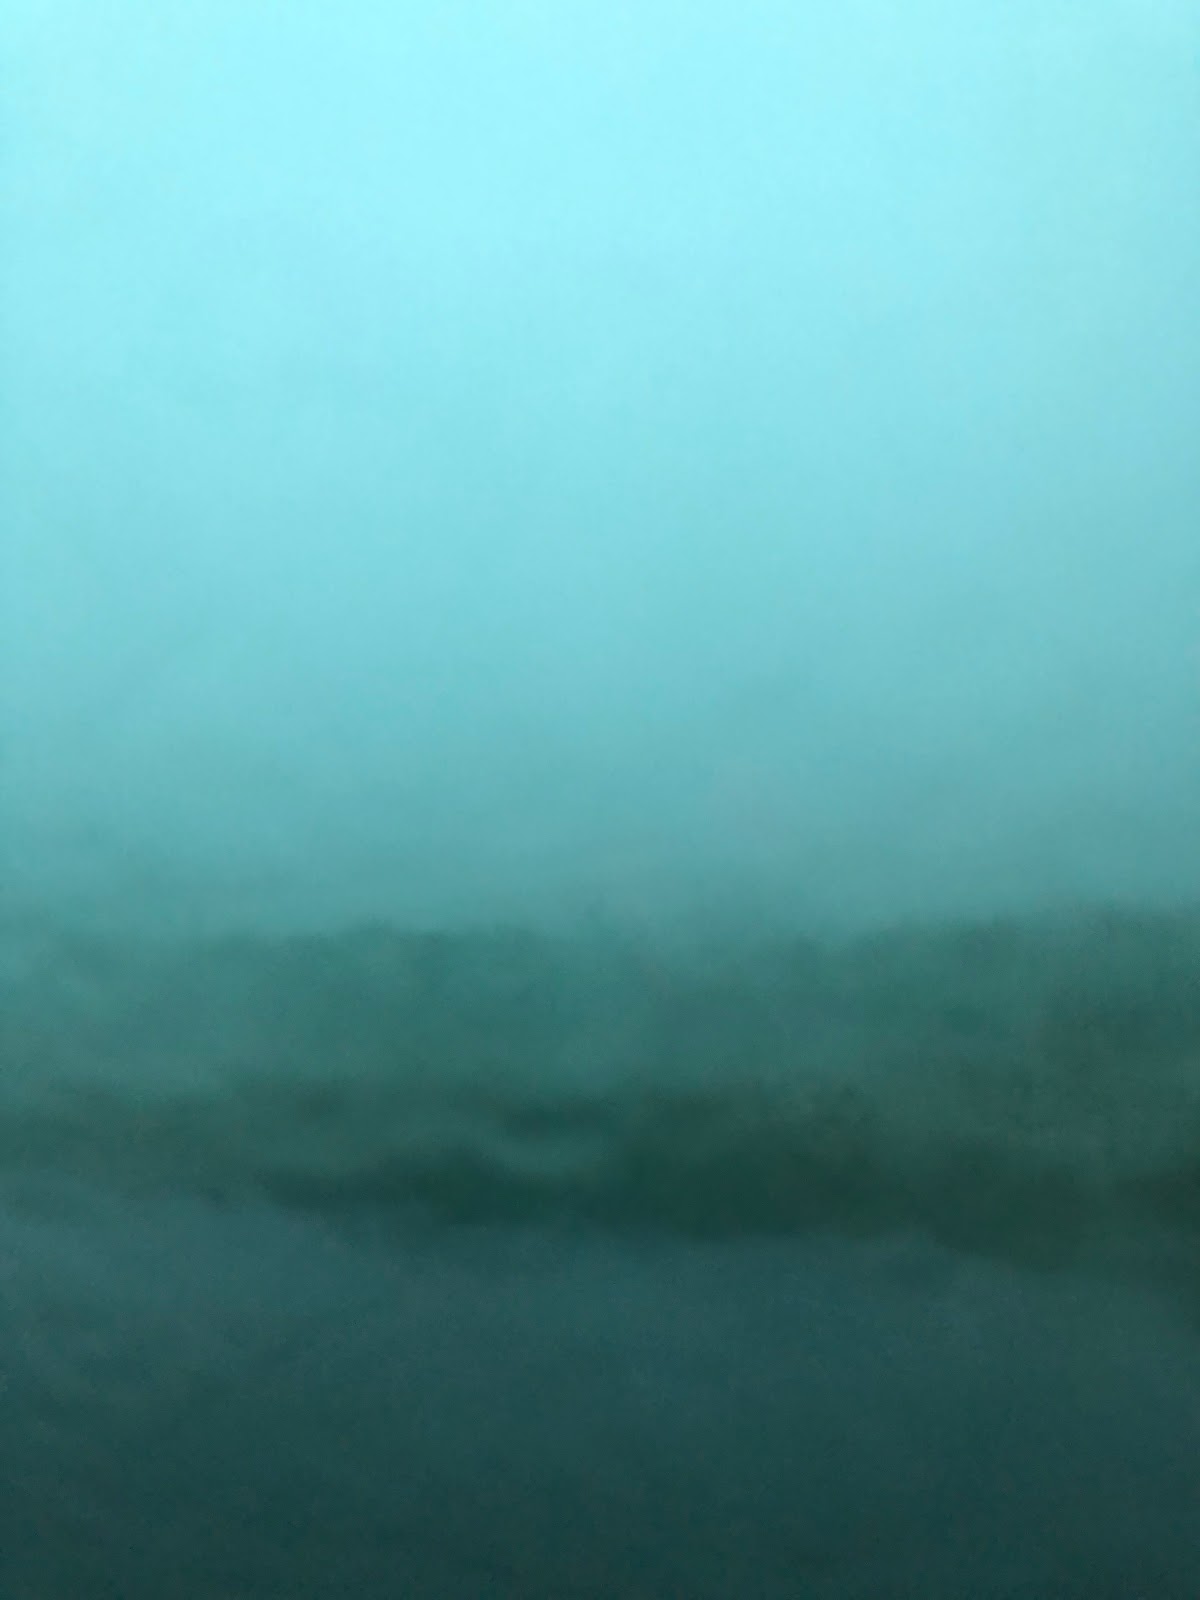 Photo of a fierce storm I took from my car between Chicago and Indianapolis